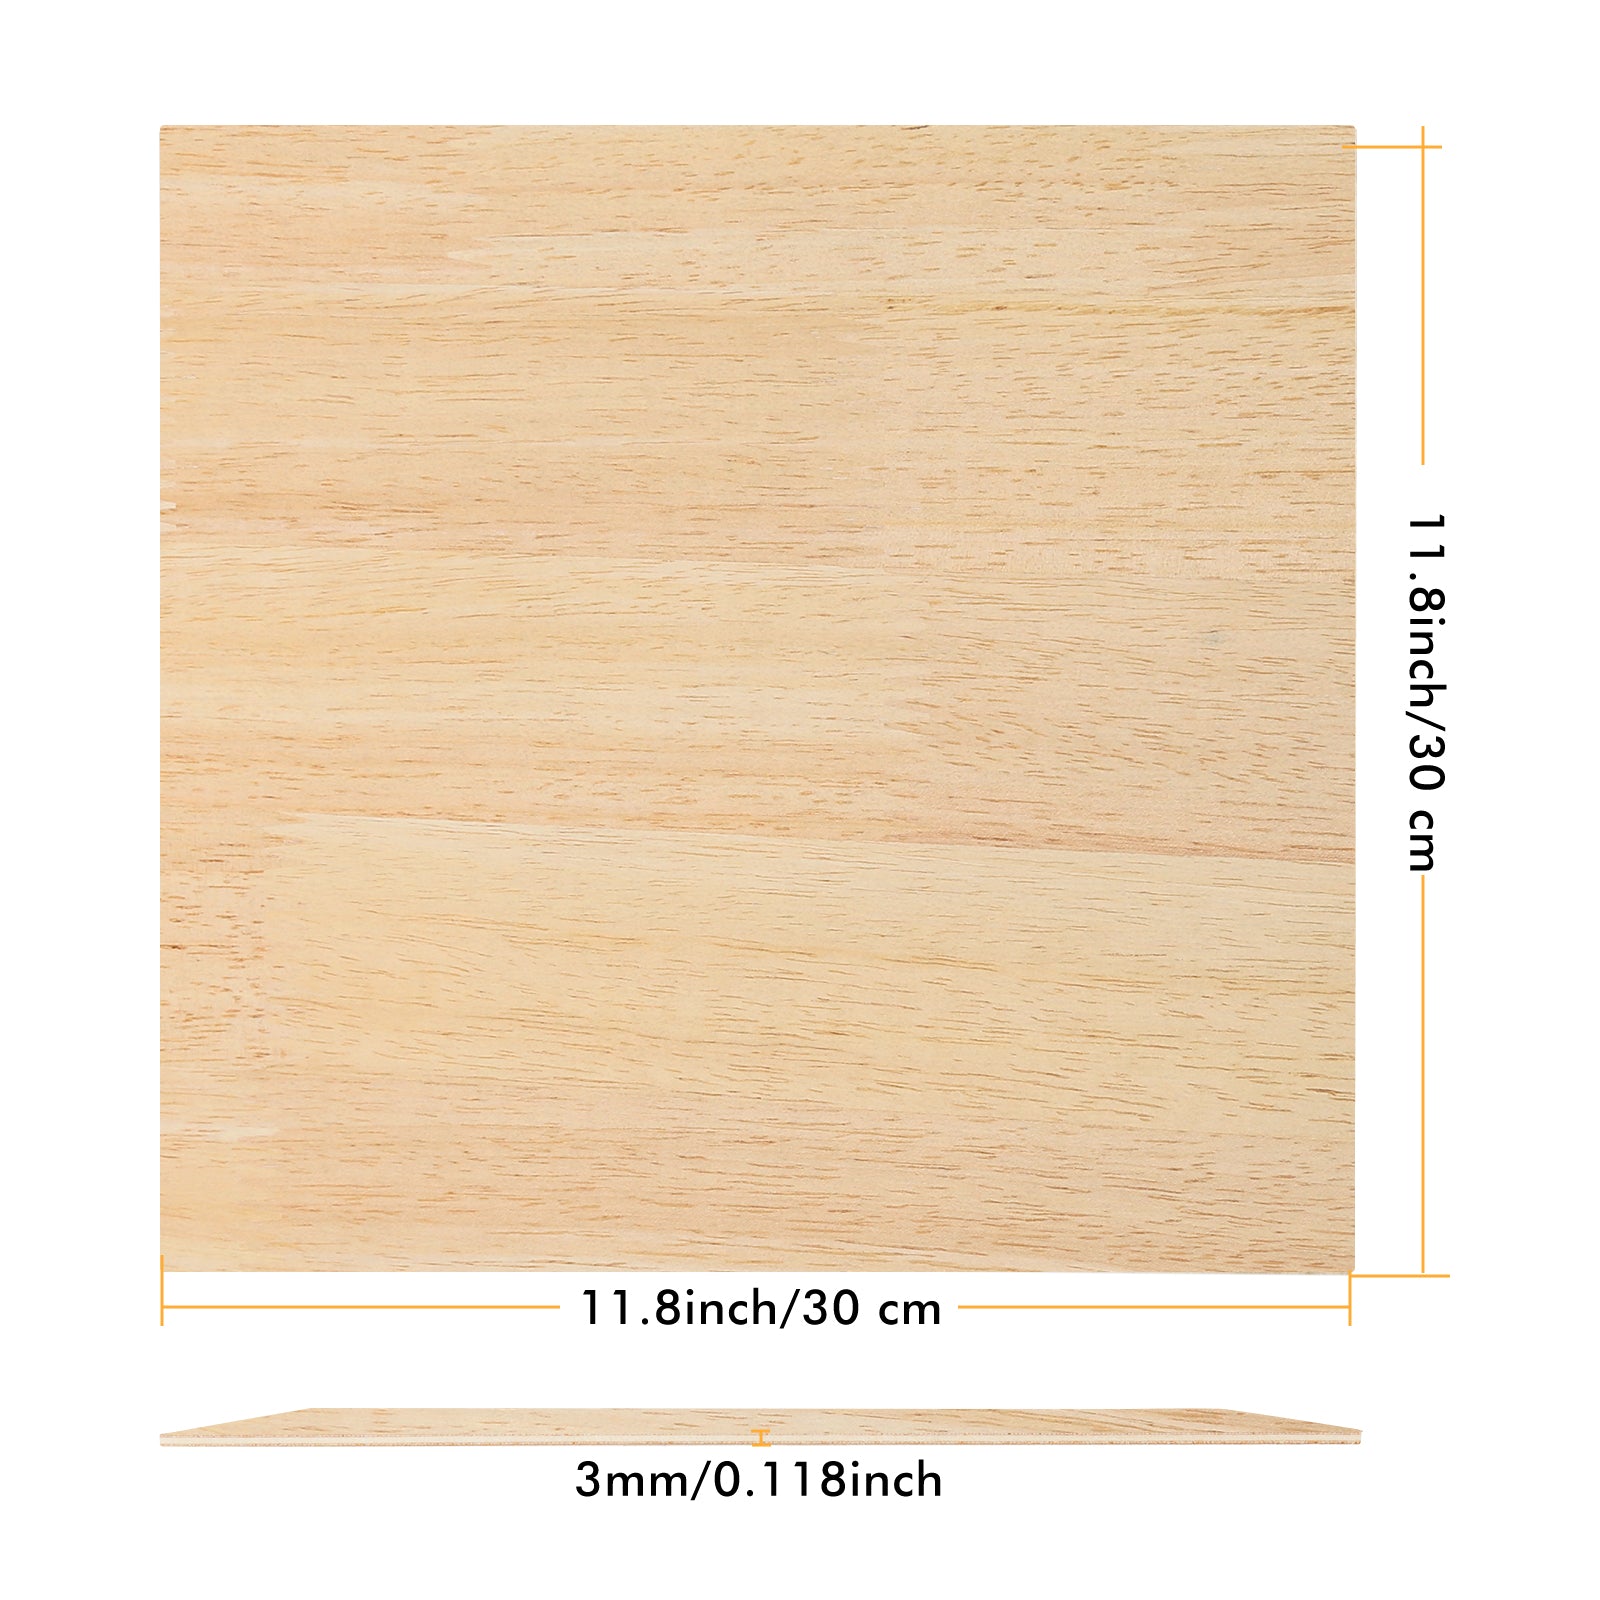 6pcs Rubberwood Spliced Plywood 12 x 12 Unfinished Wood for Laser Engraving Cutting Crafts